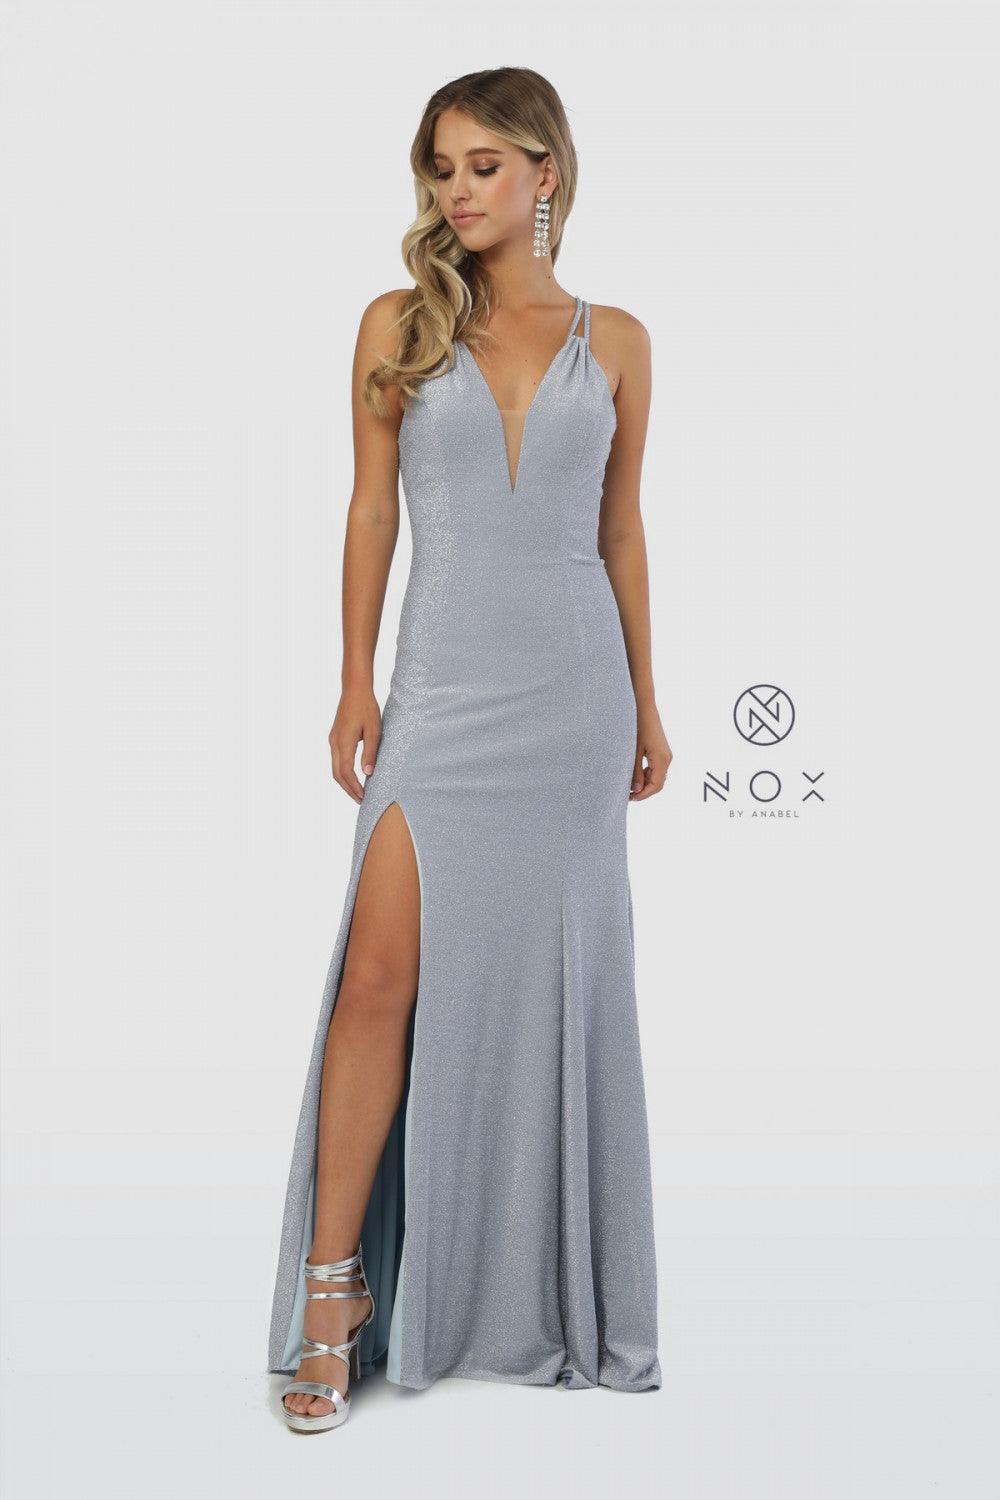 Long Sexy High Slit Prom Dress Evening Gown - The Dress Outlet Nox Anabel